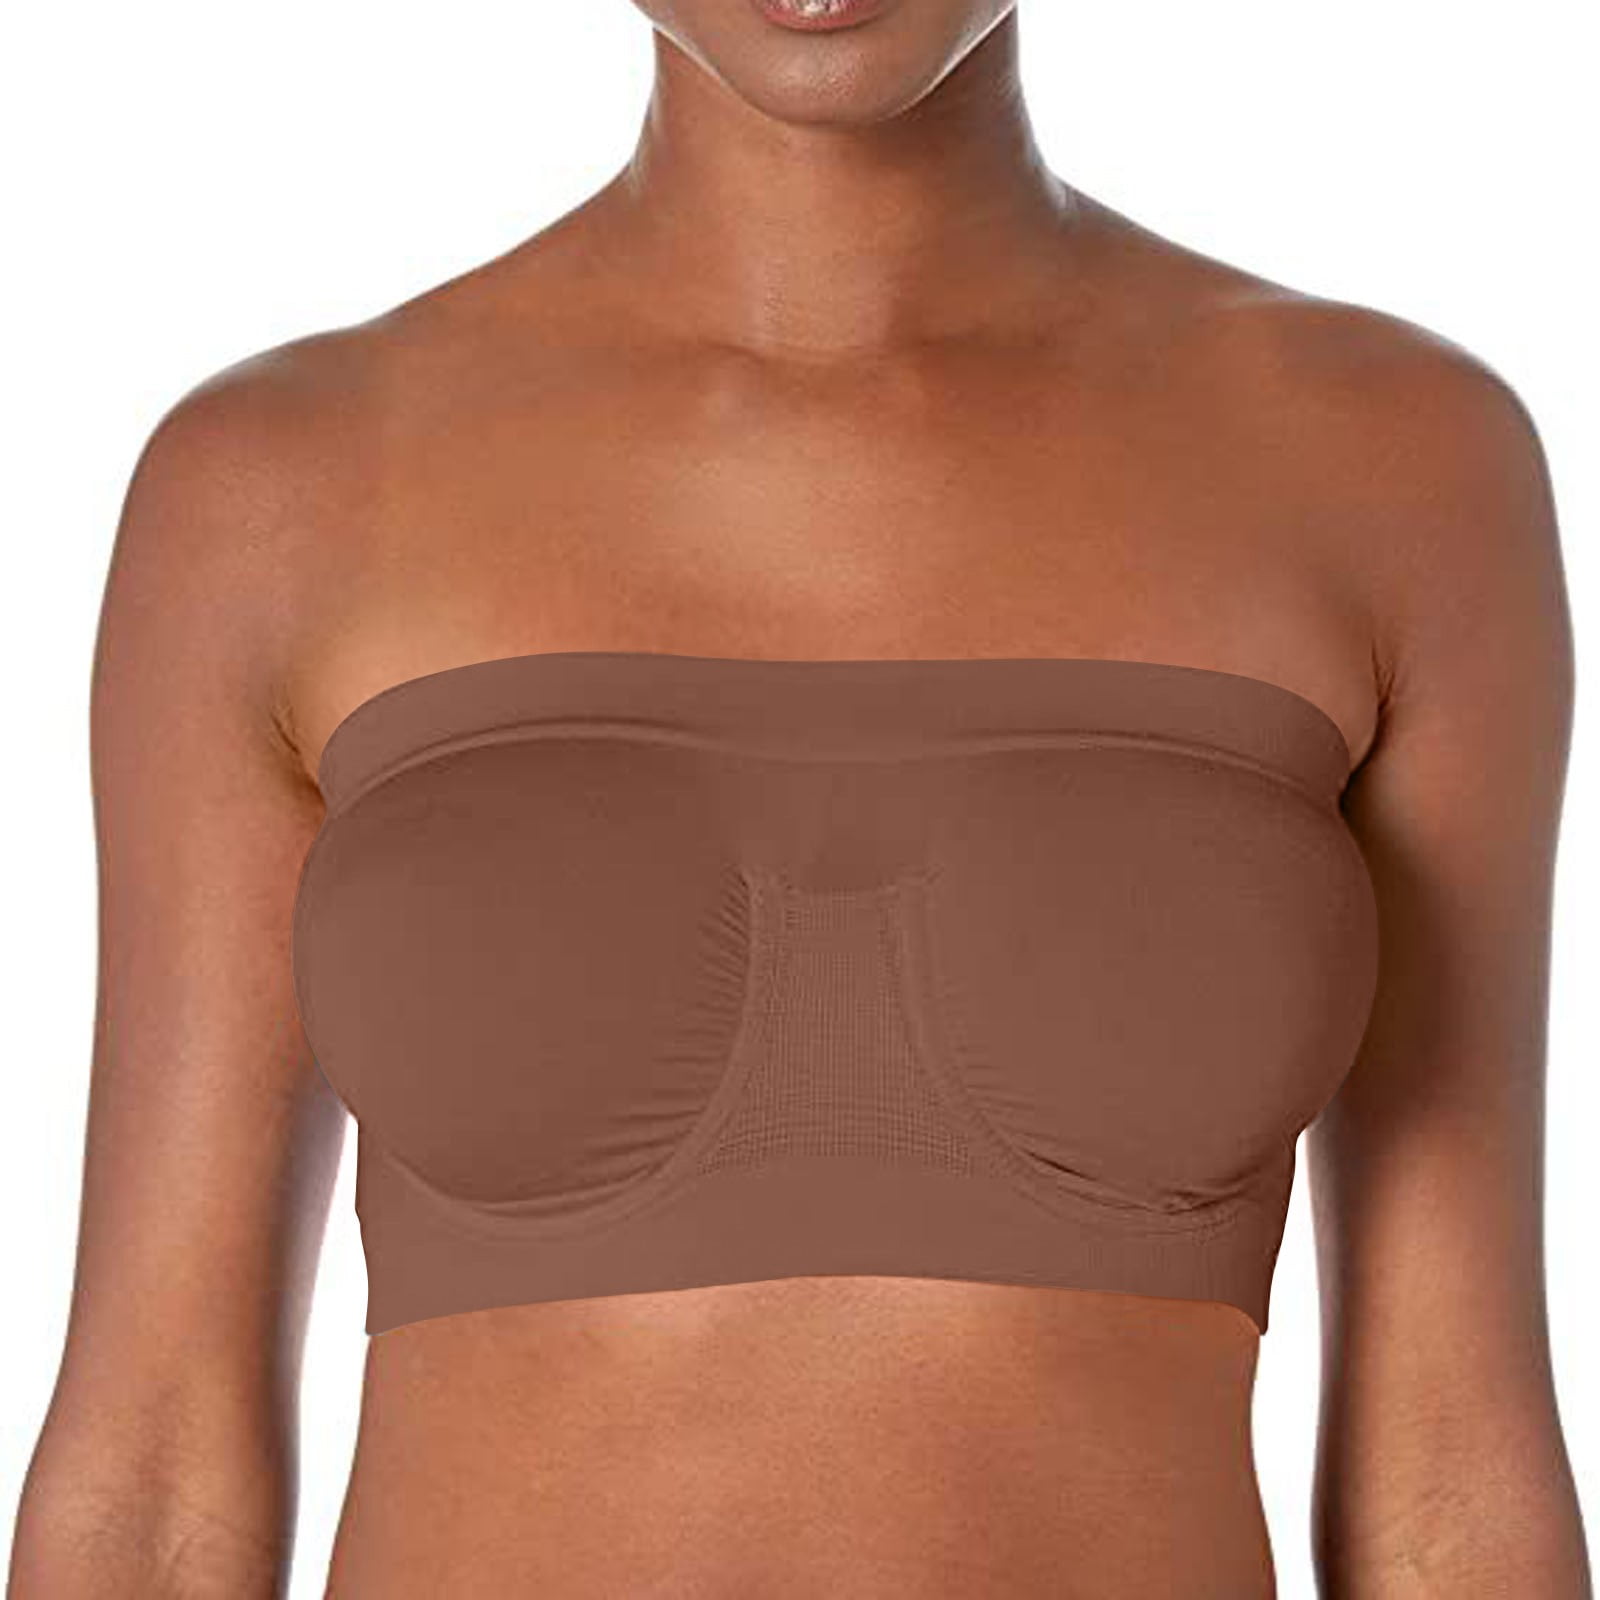 Knosfe Strapless Bra Push Up Full Coverage Bandeaus Bras for Women